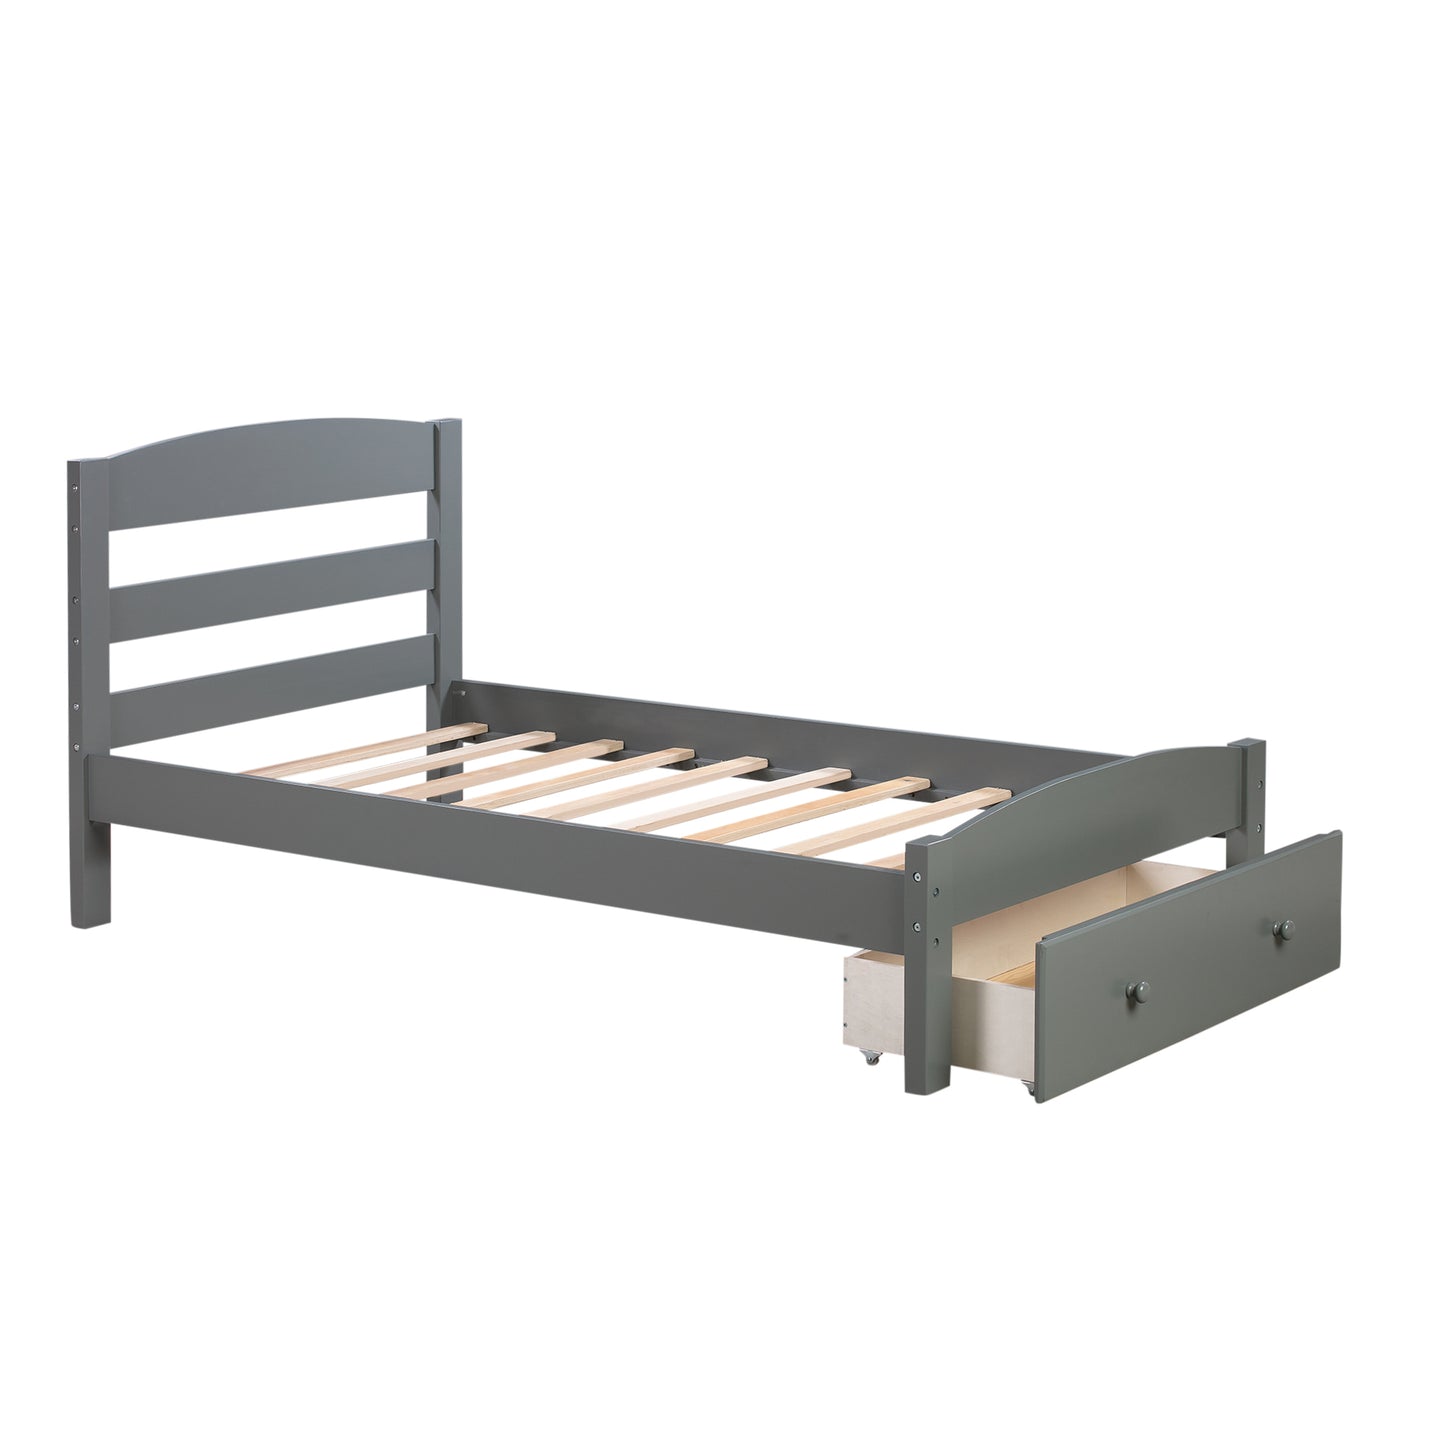 Platform Twin Bed Frame with Storage Drawer and Wood Slat Support No Box Spring Needed, Gray